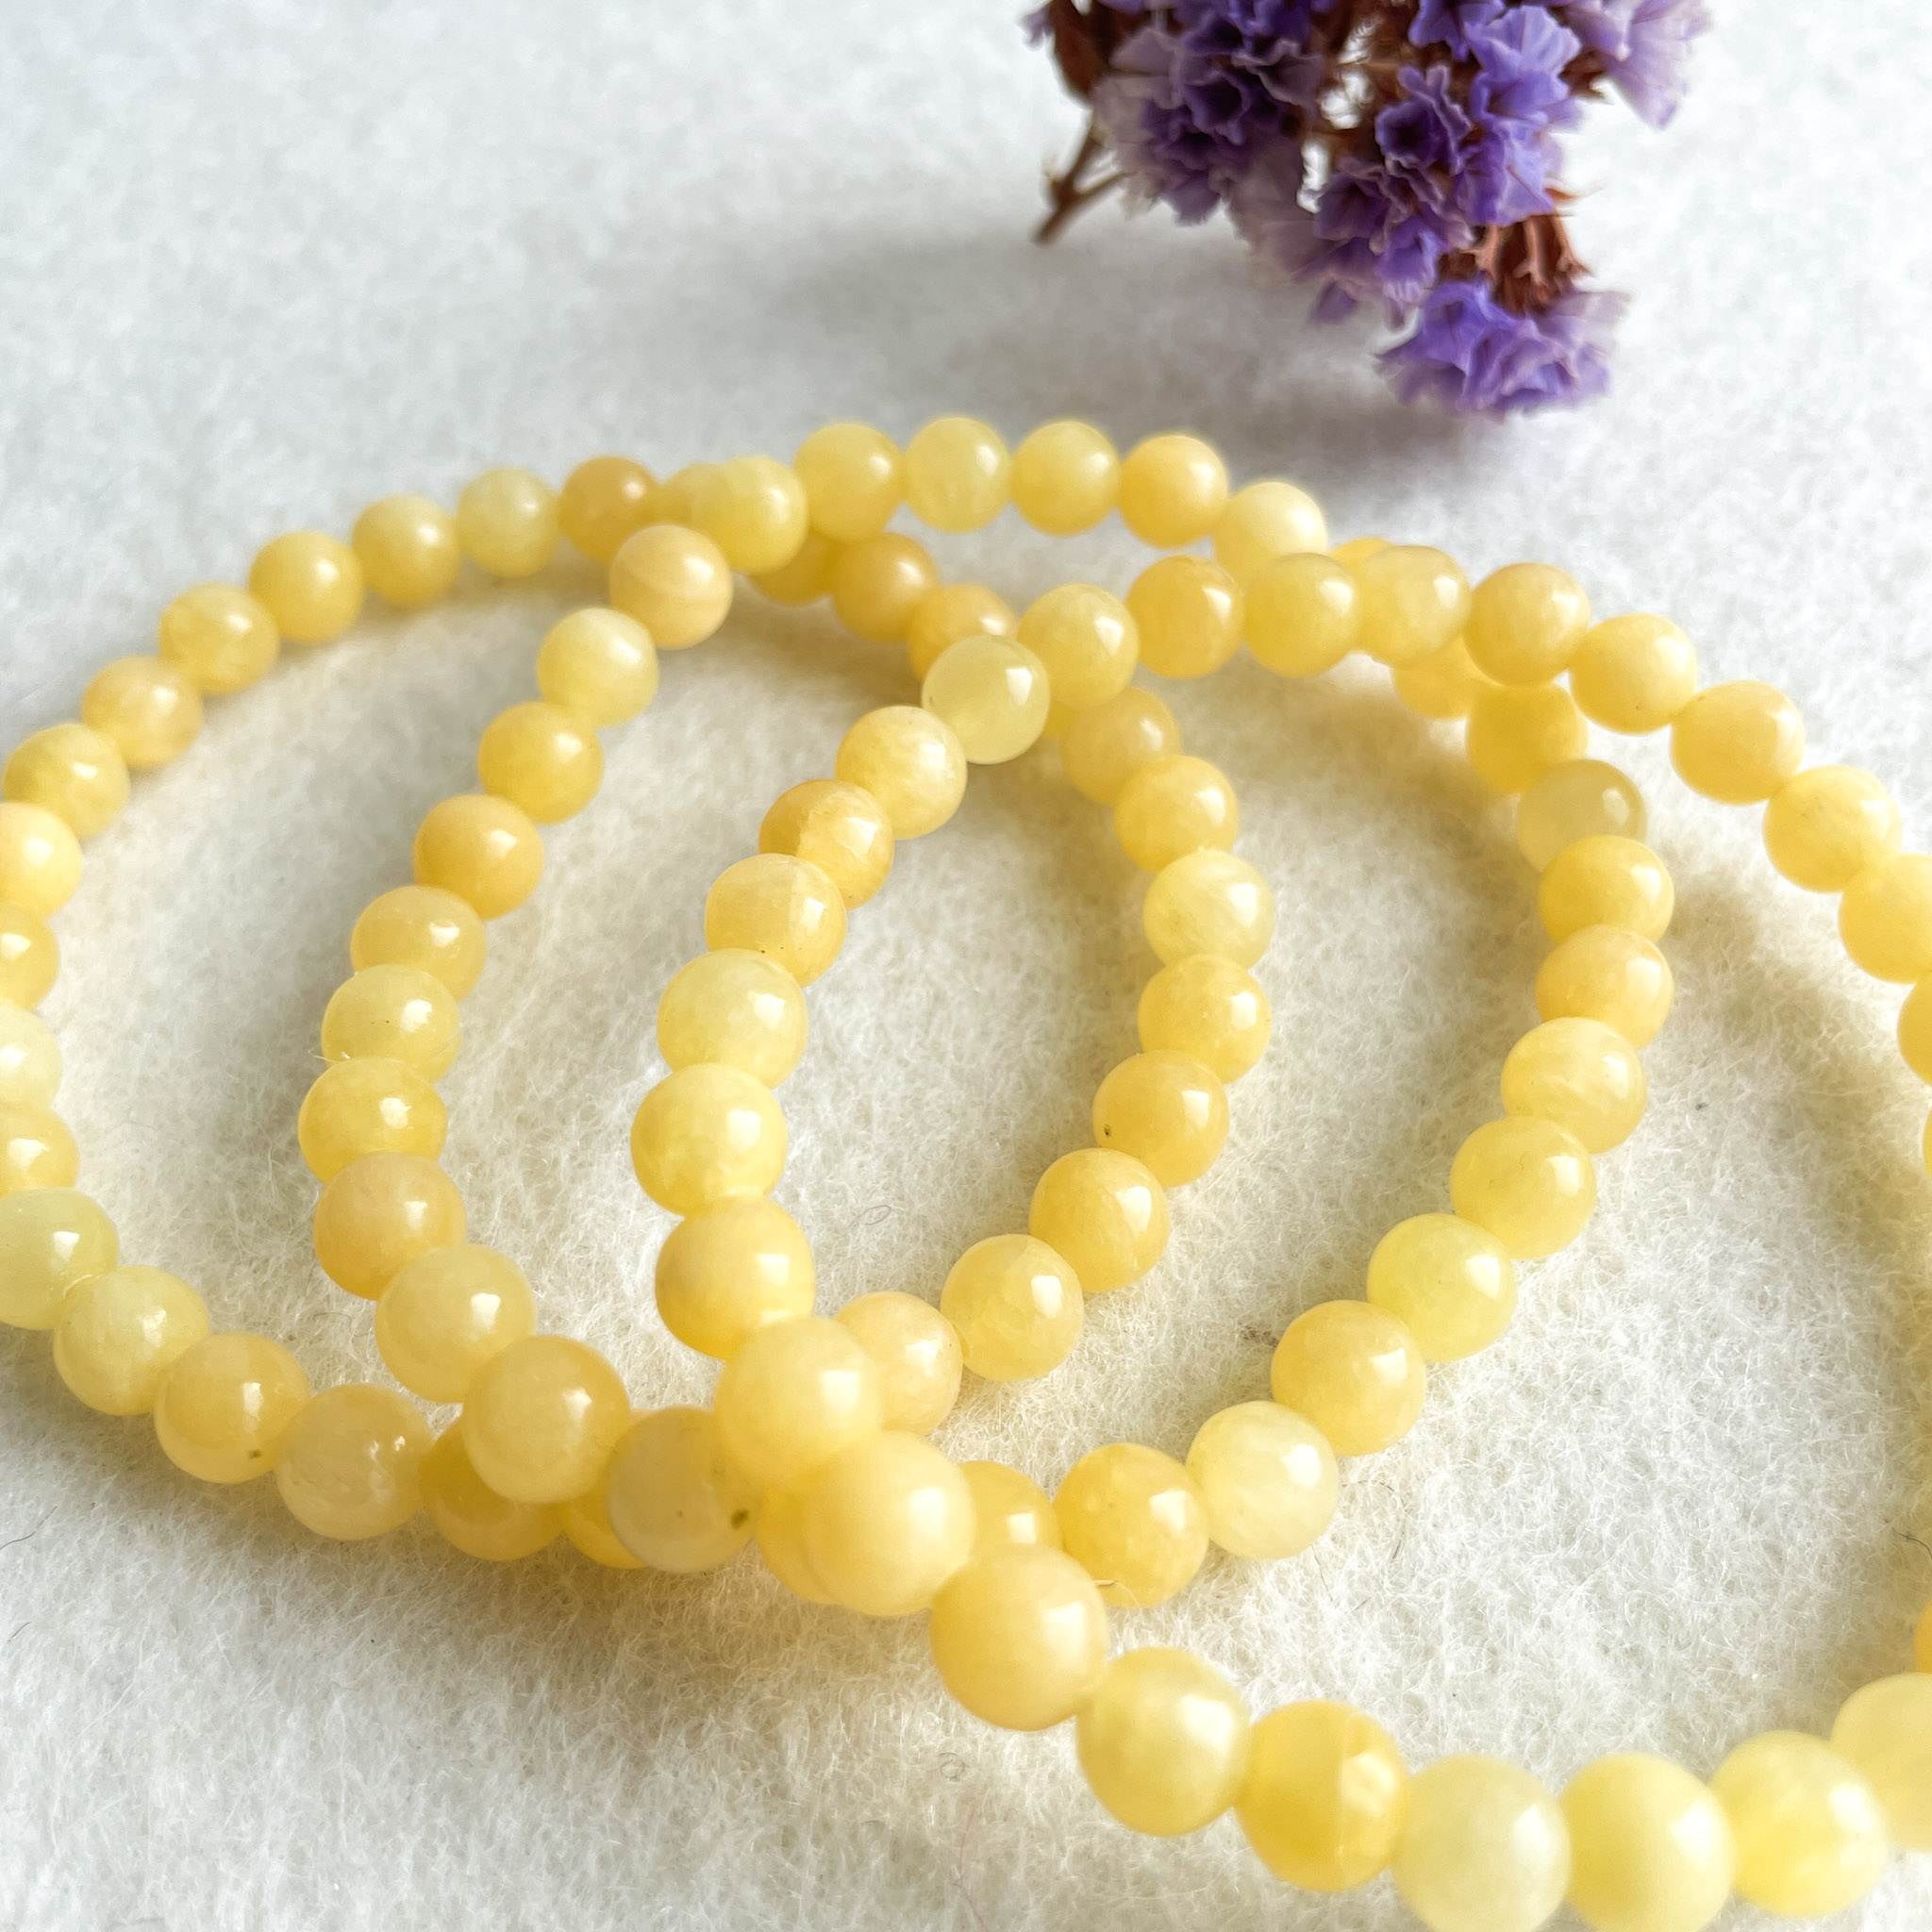 Three strands of yellow beaded bracelets laid out on a white textured surface with a small bunch of purple dried flowers at the top right corner.